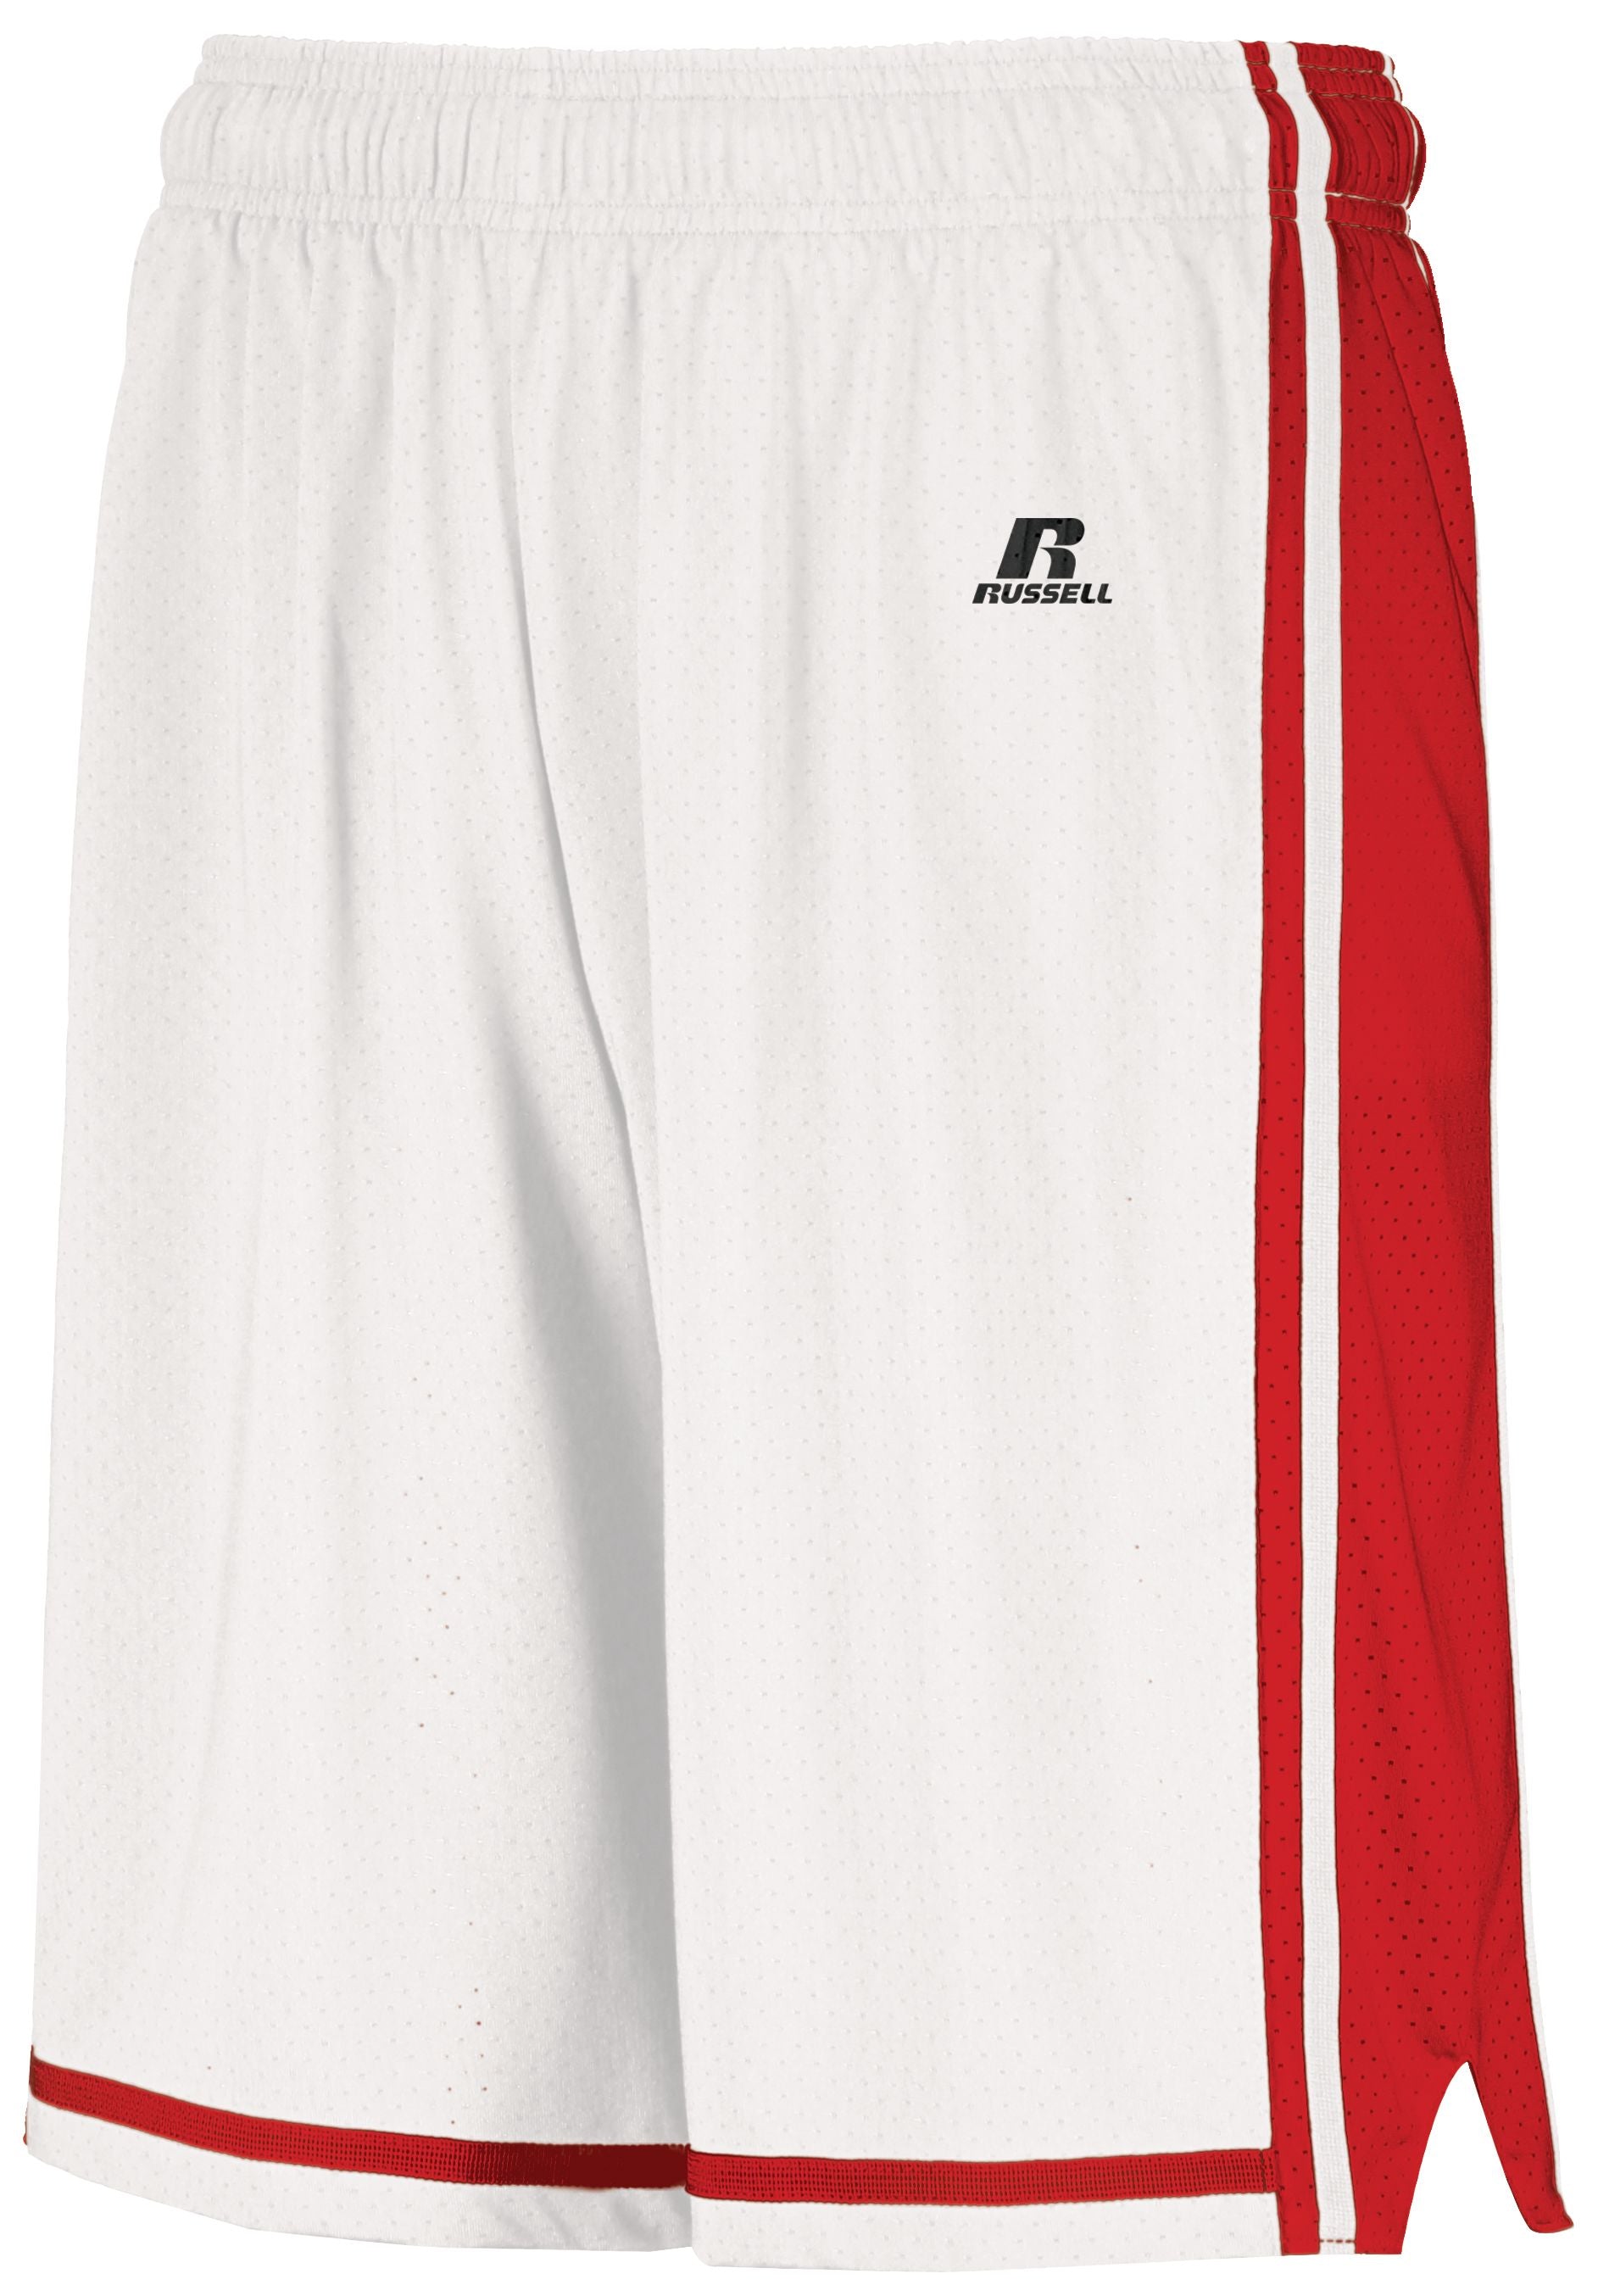 Russell Athletic Legacy Basketball Shorts in White/True Red  -Part of the Adult, Adult-Shorts, Basketball, Russell-Athletic-Products, All-Sports, All-Sports-1 product lines at KanaleyCreations.com